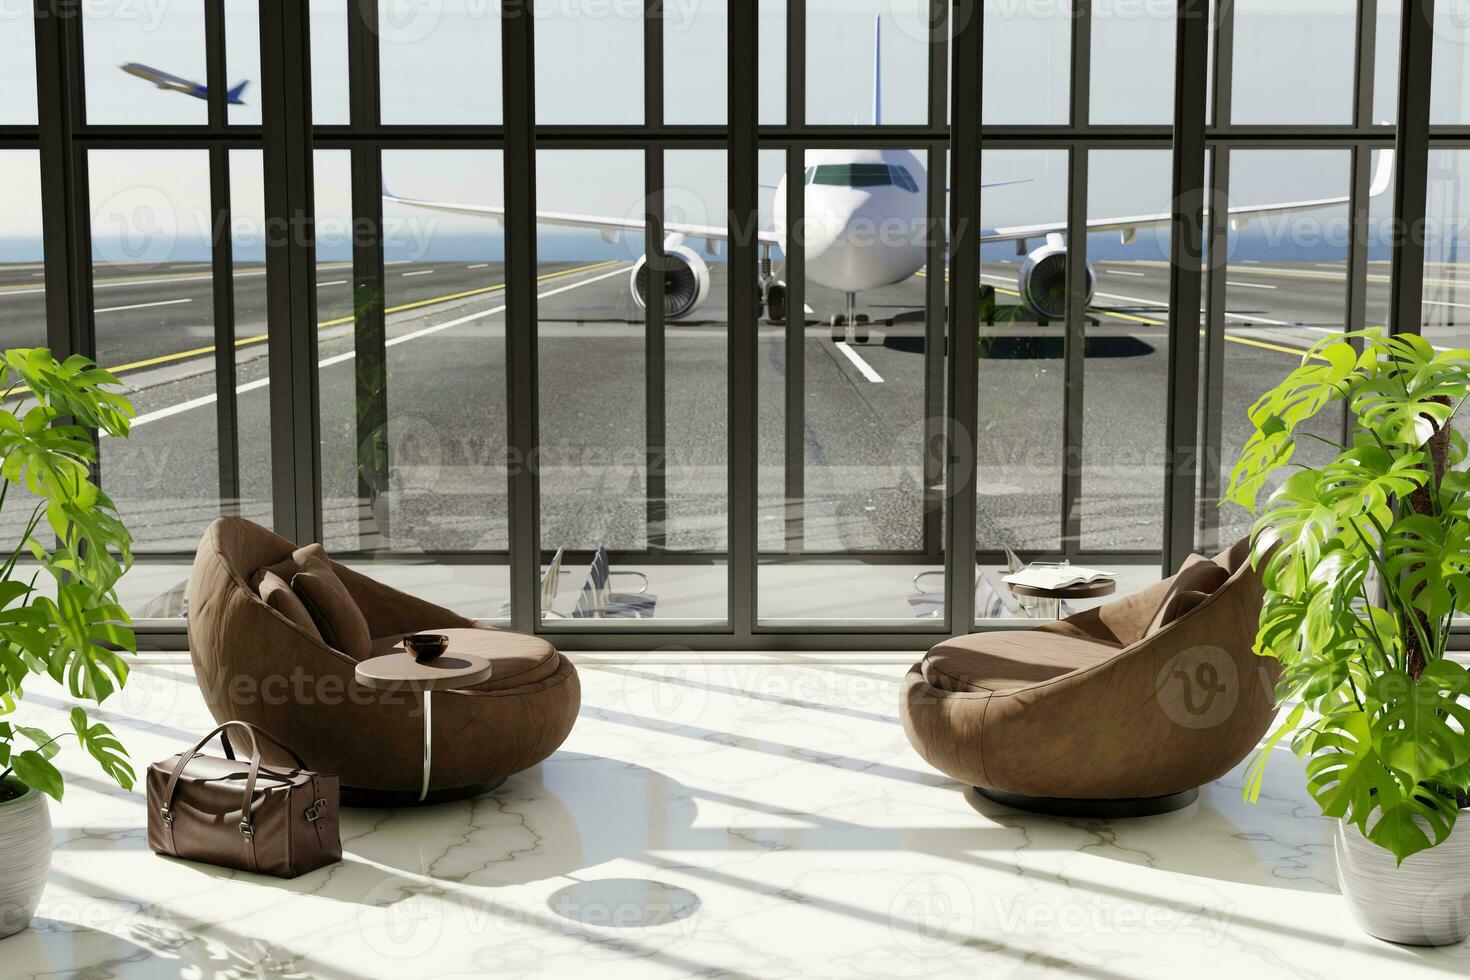 3D interior of airport, airplane in window, flight waiting area, concept of travel lounge area for business class photo